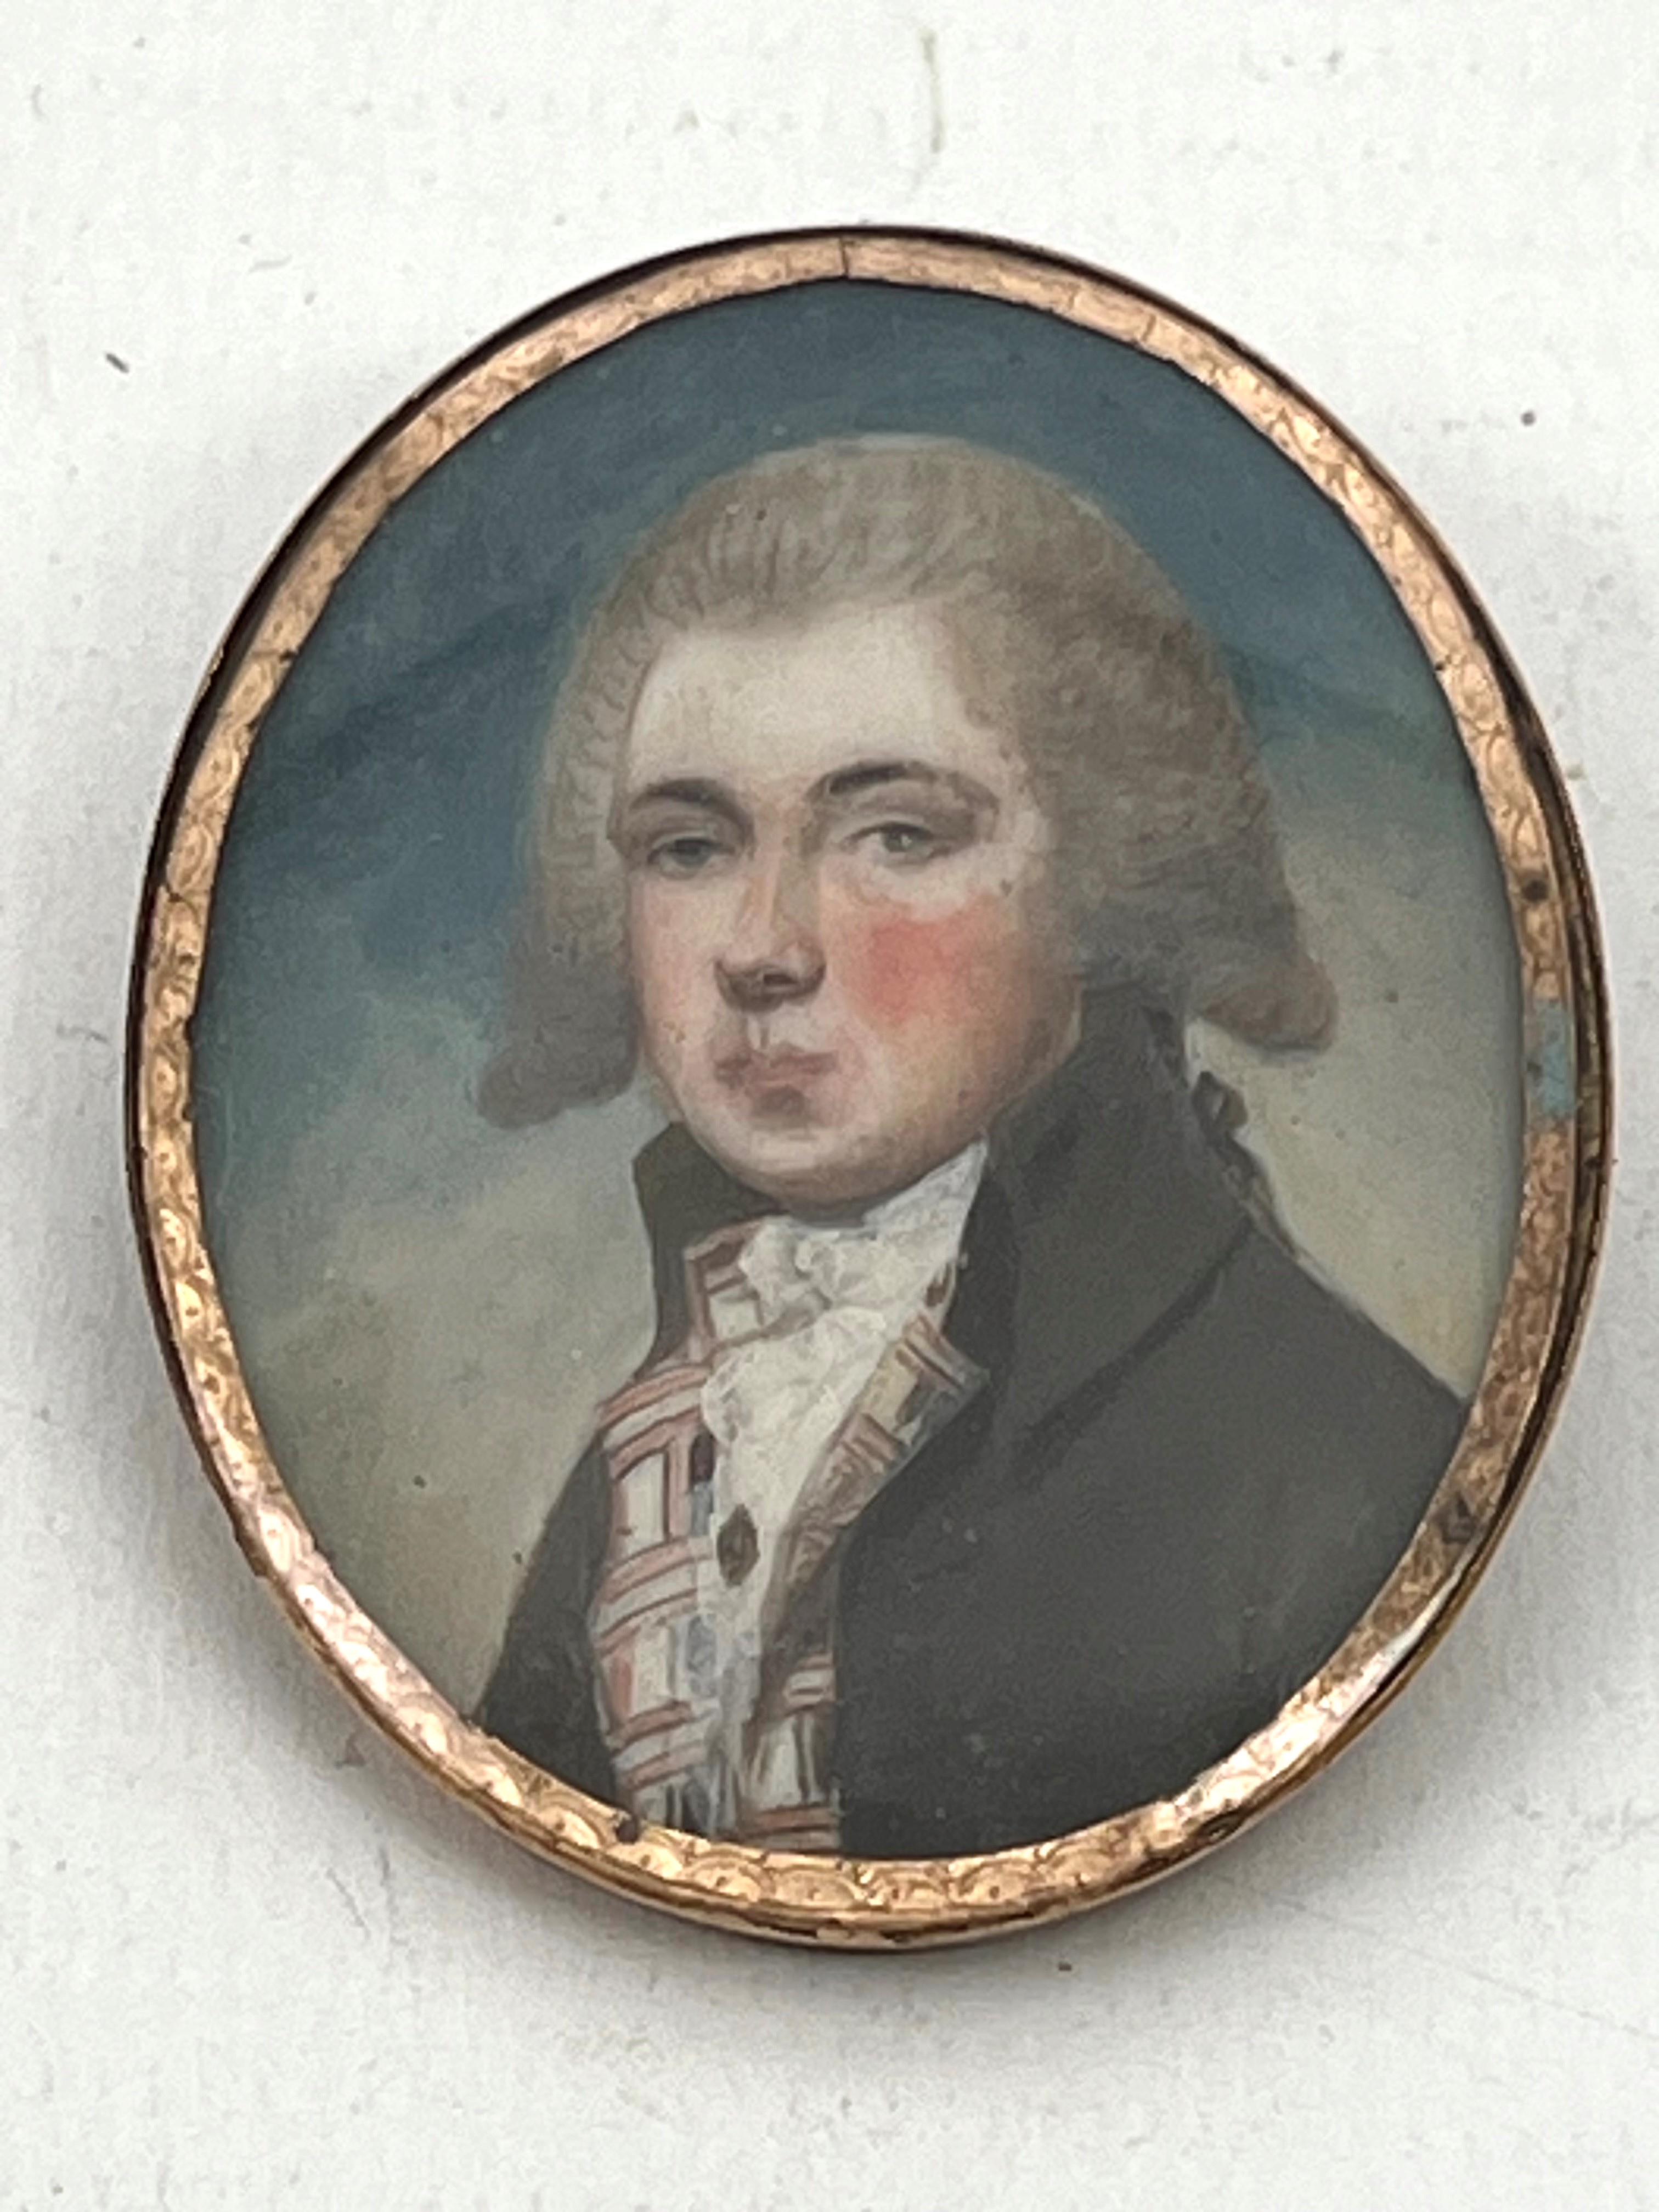 An English School, late 18th century portrait miniature of a young gentleman - oval oil on ivory,